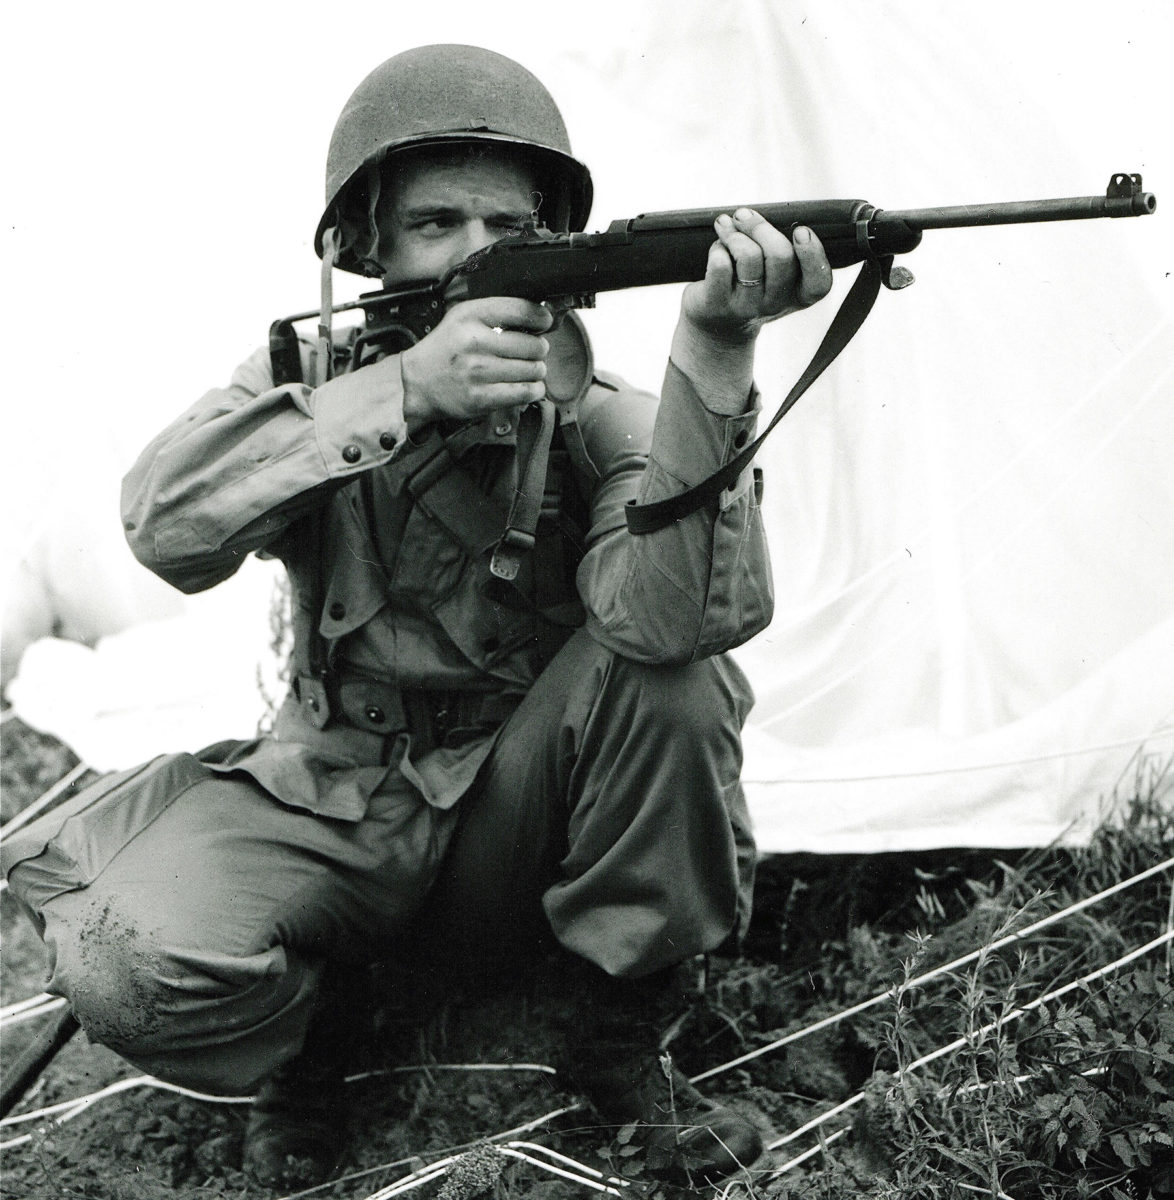 US paratroop with M1A1 carbine